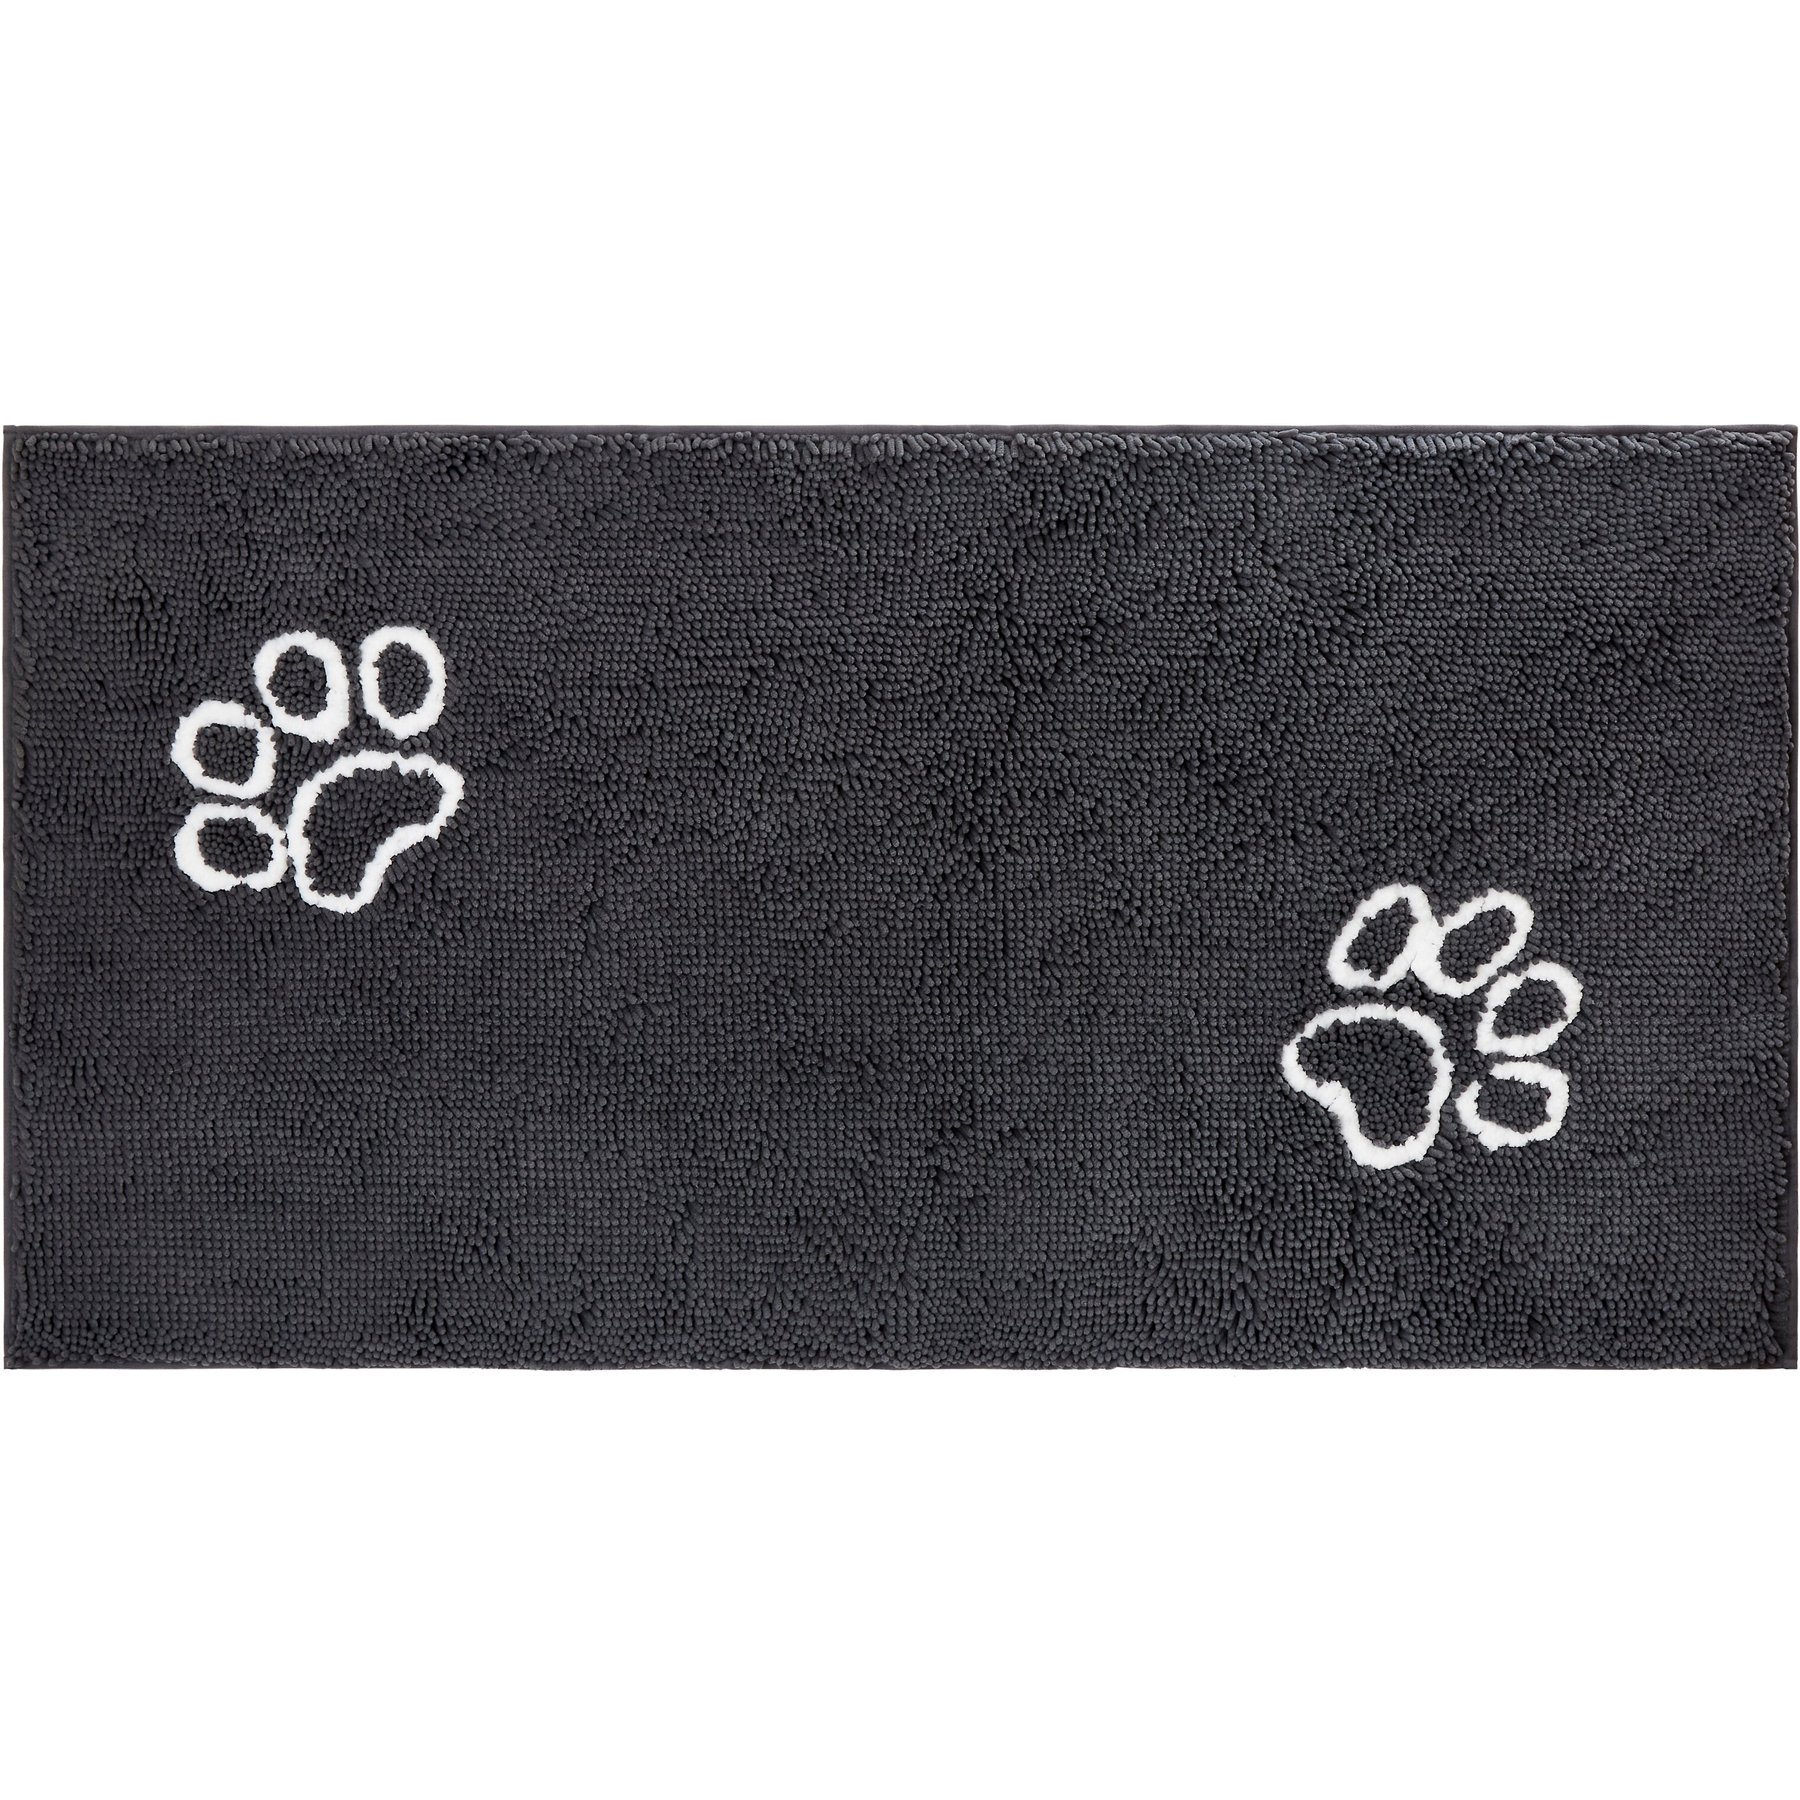 My Doggy Place Dog Mat for Muddy Paws, Washable Dog Door Mat, Charcoal,  Runner 